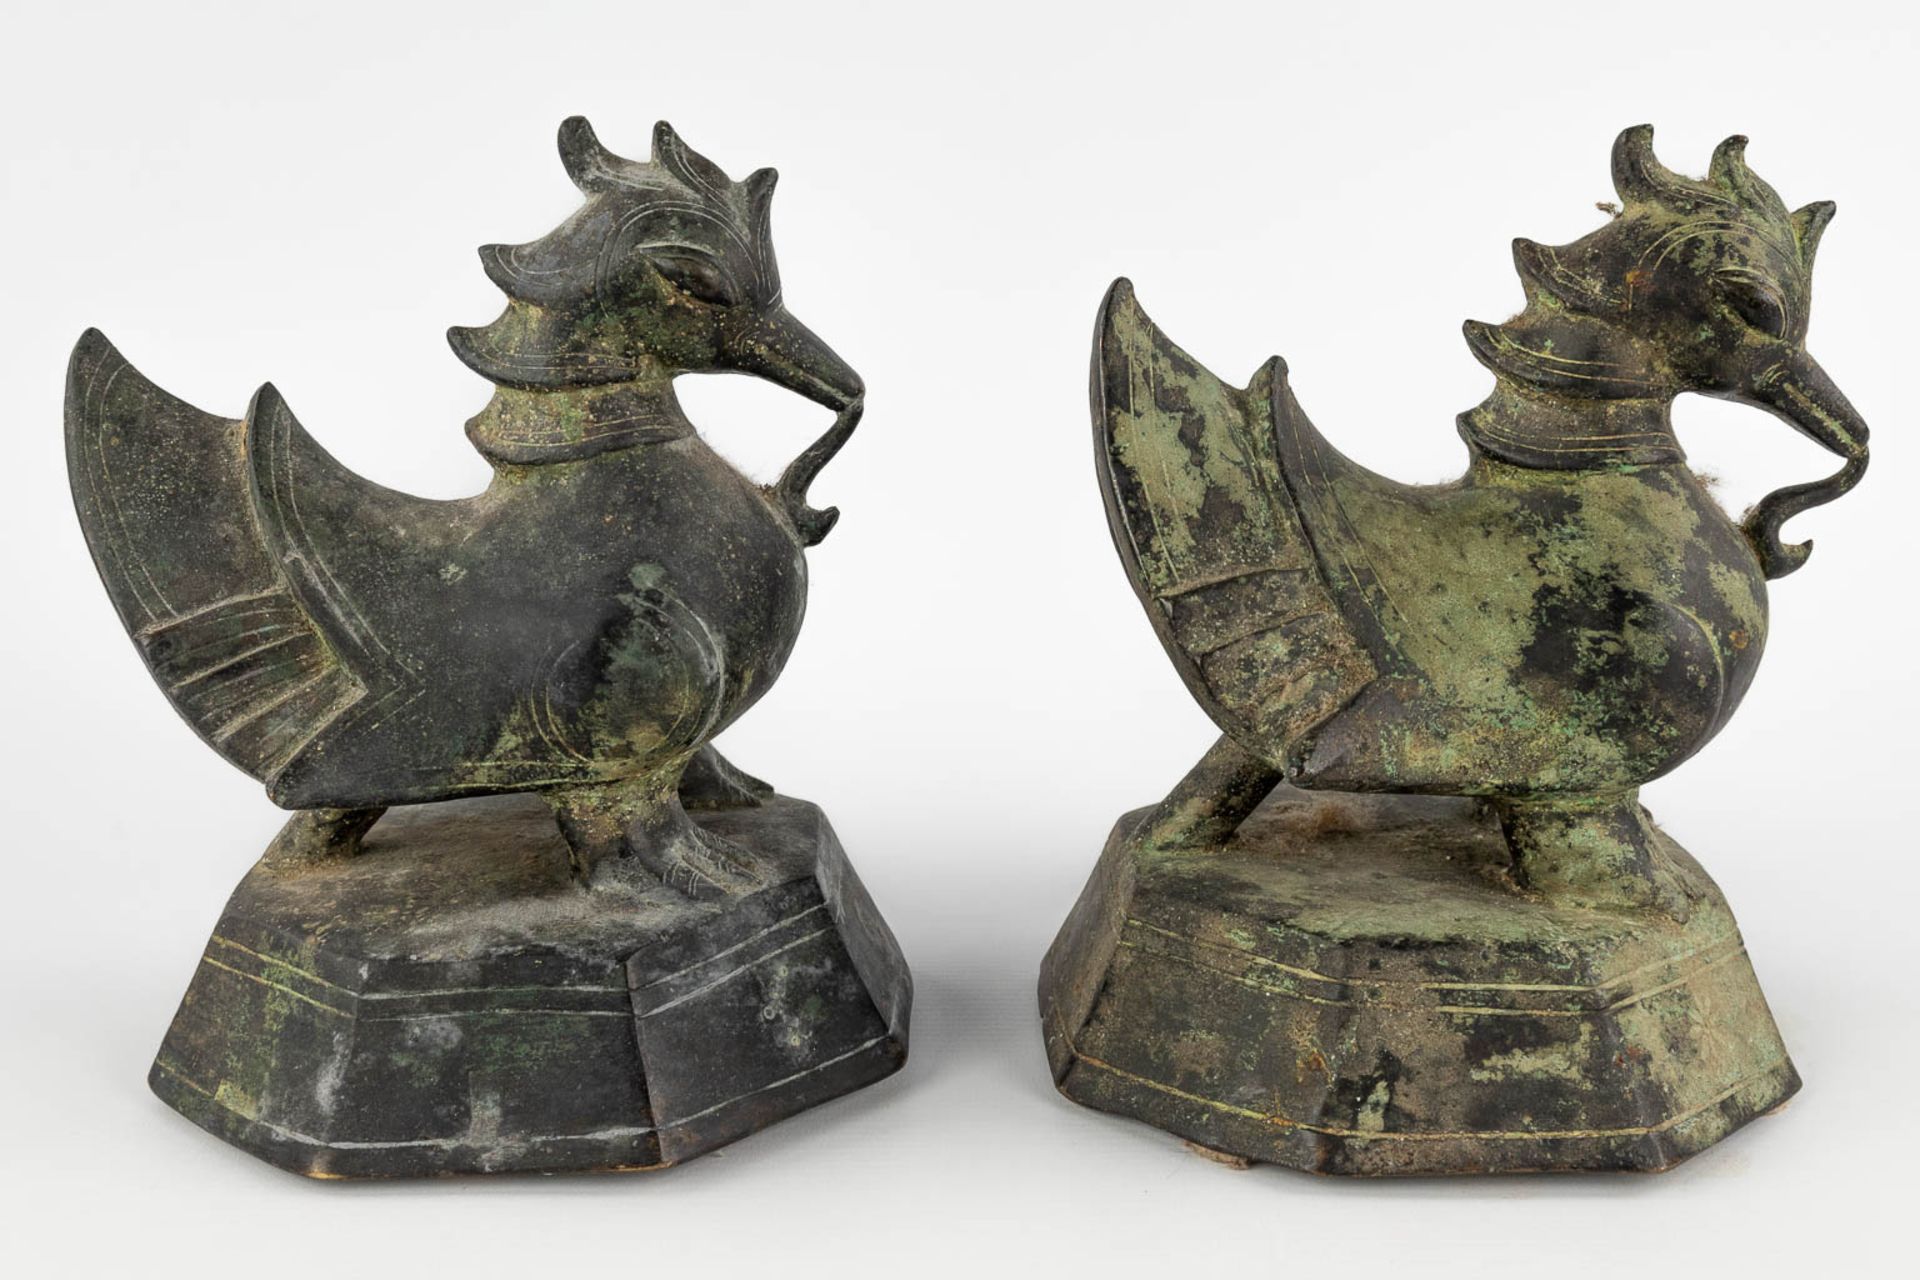 A pair of Oriental figurines, decorated with mythological figurines. Bronze. (D:17 x W:18 x H:22 cm) - Image 4 of 10